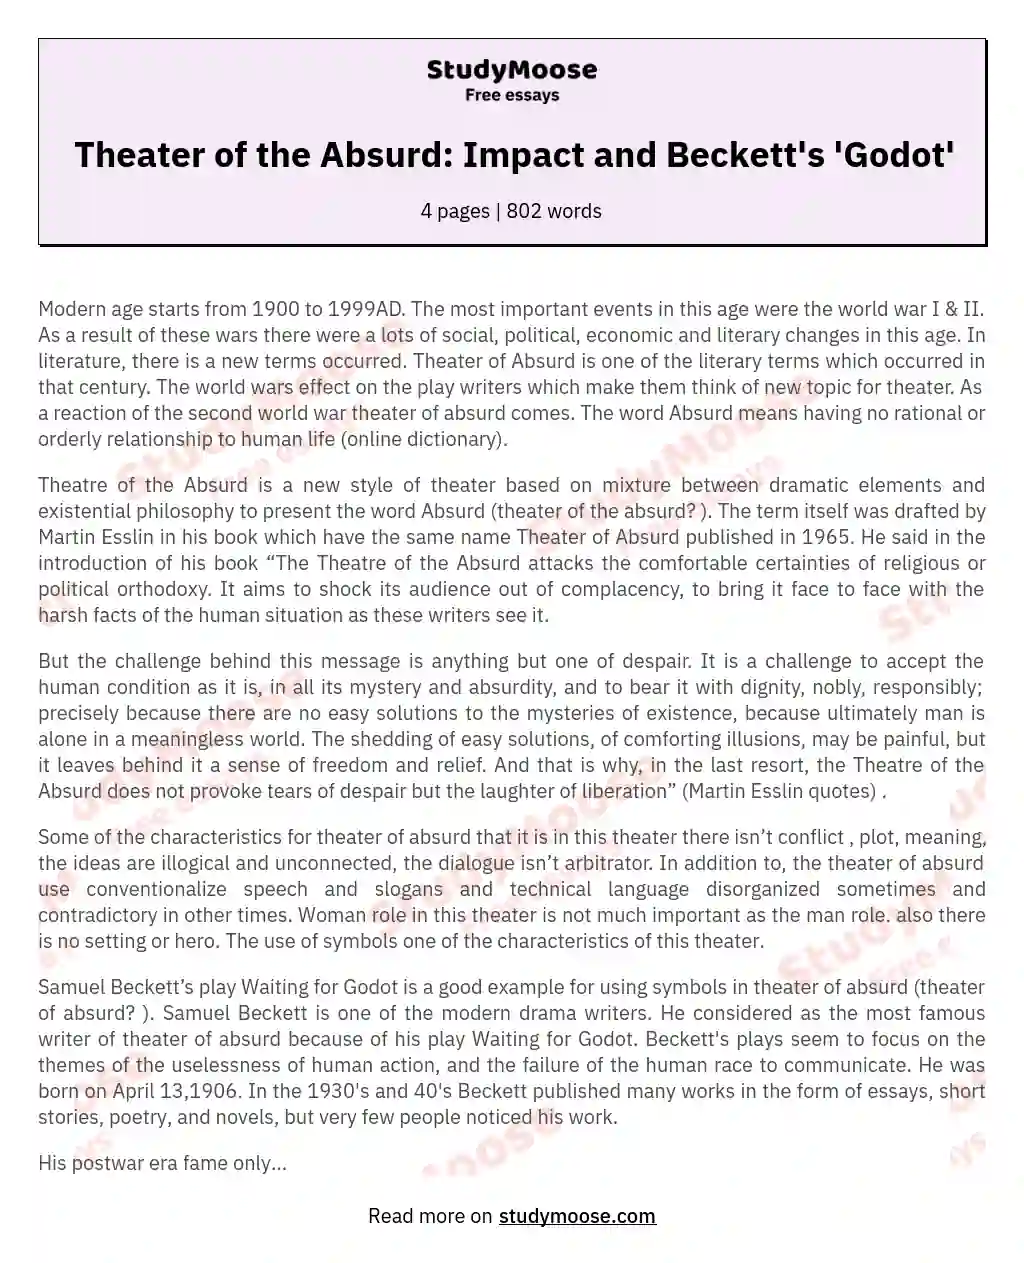 Theater of the Absurd: Impact and Beckett's 'Godot' essay